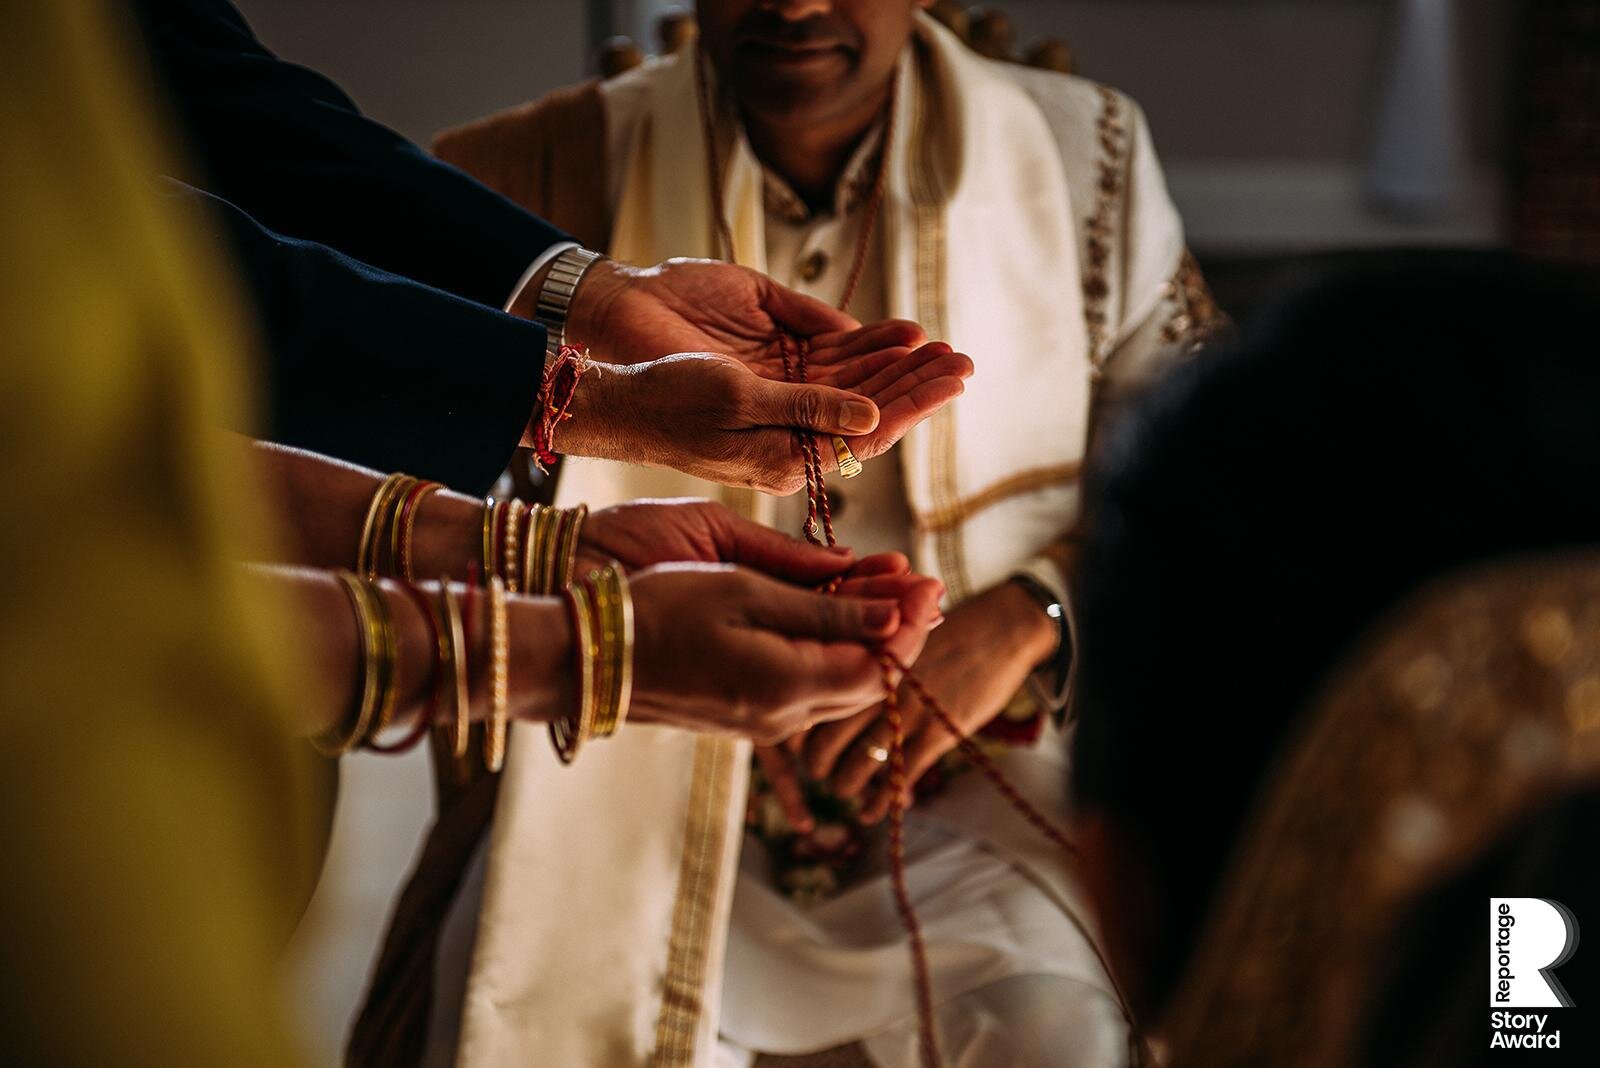  Beads on hands during the wedding ceremony 